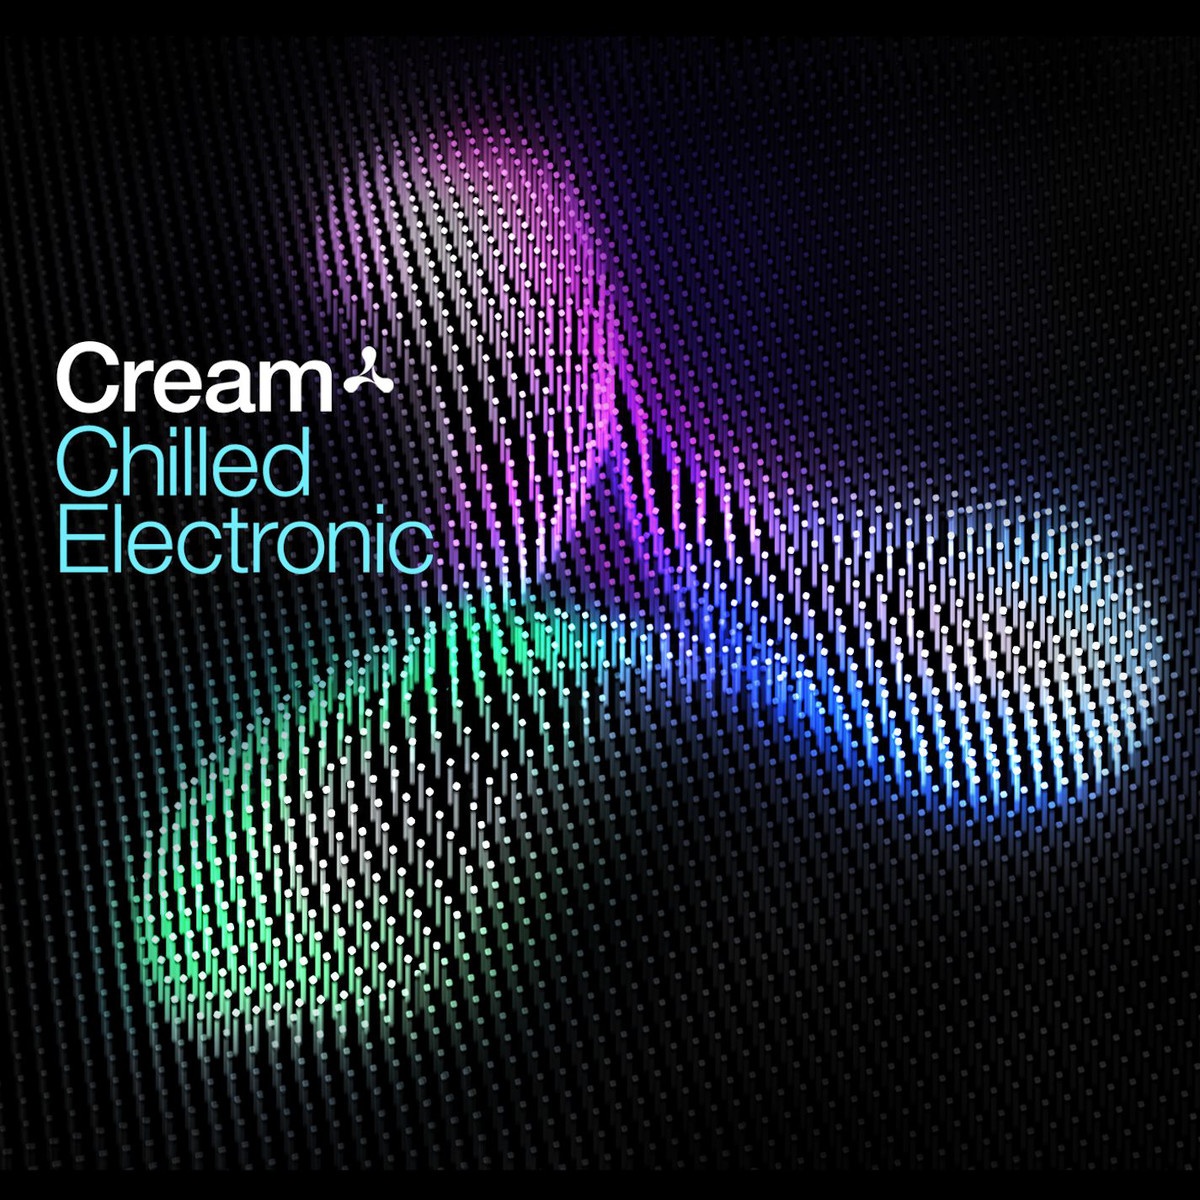 Cream Chilled Electronic